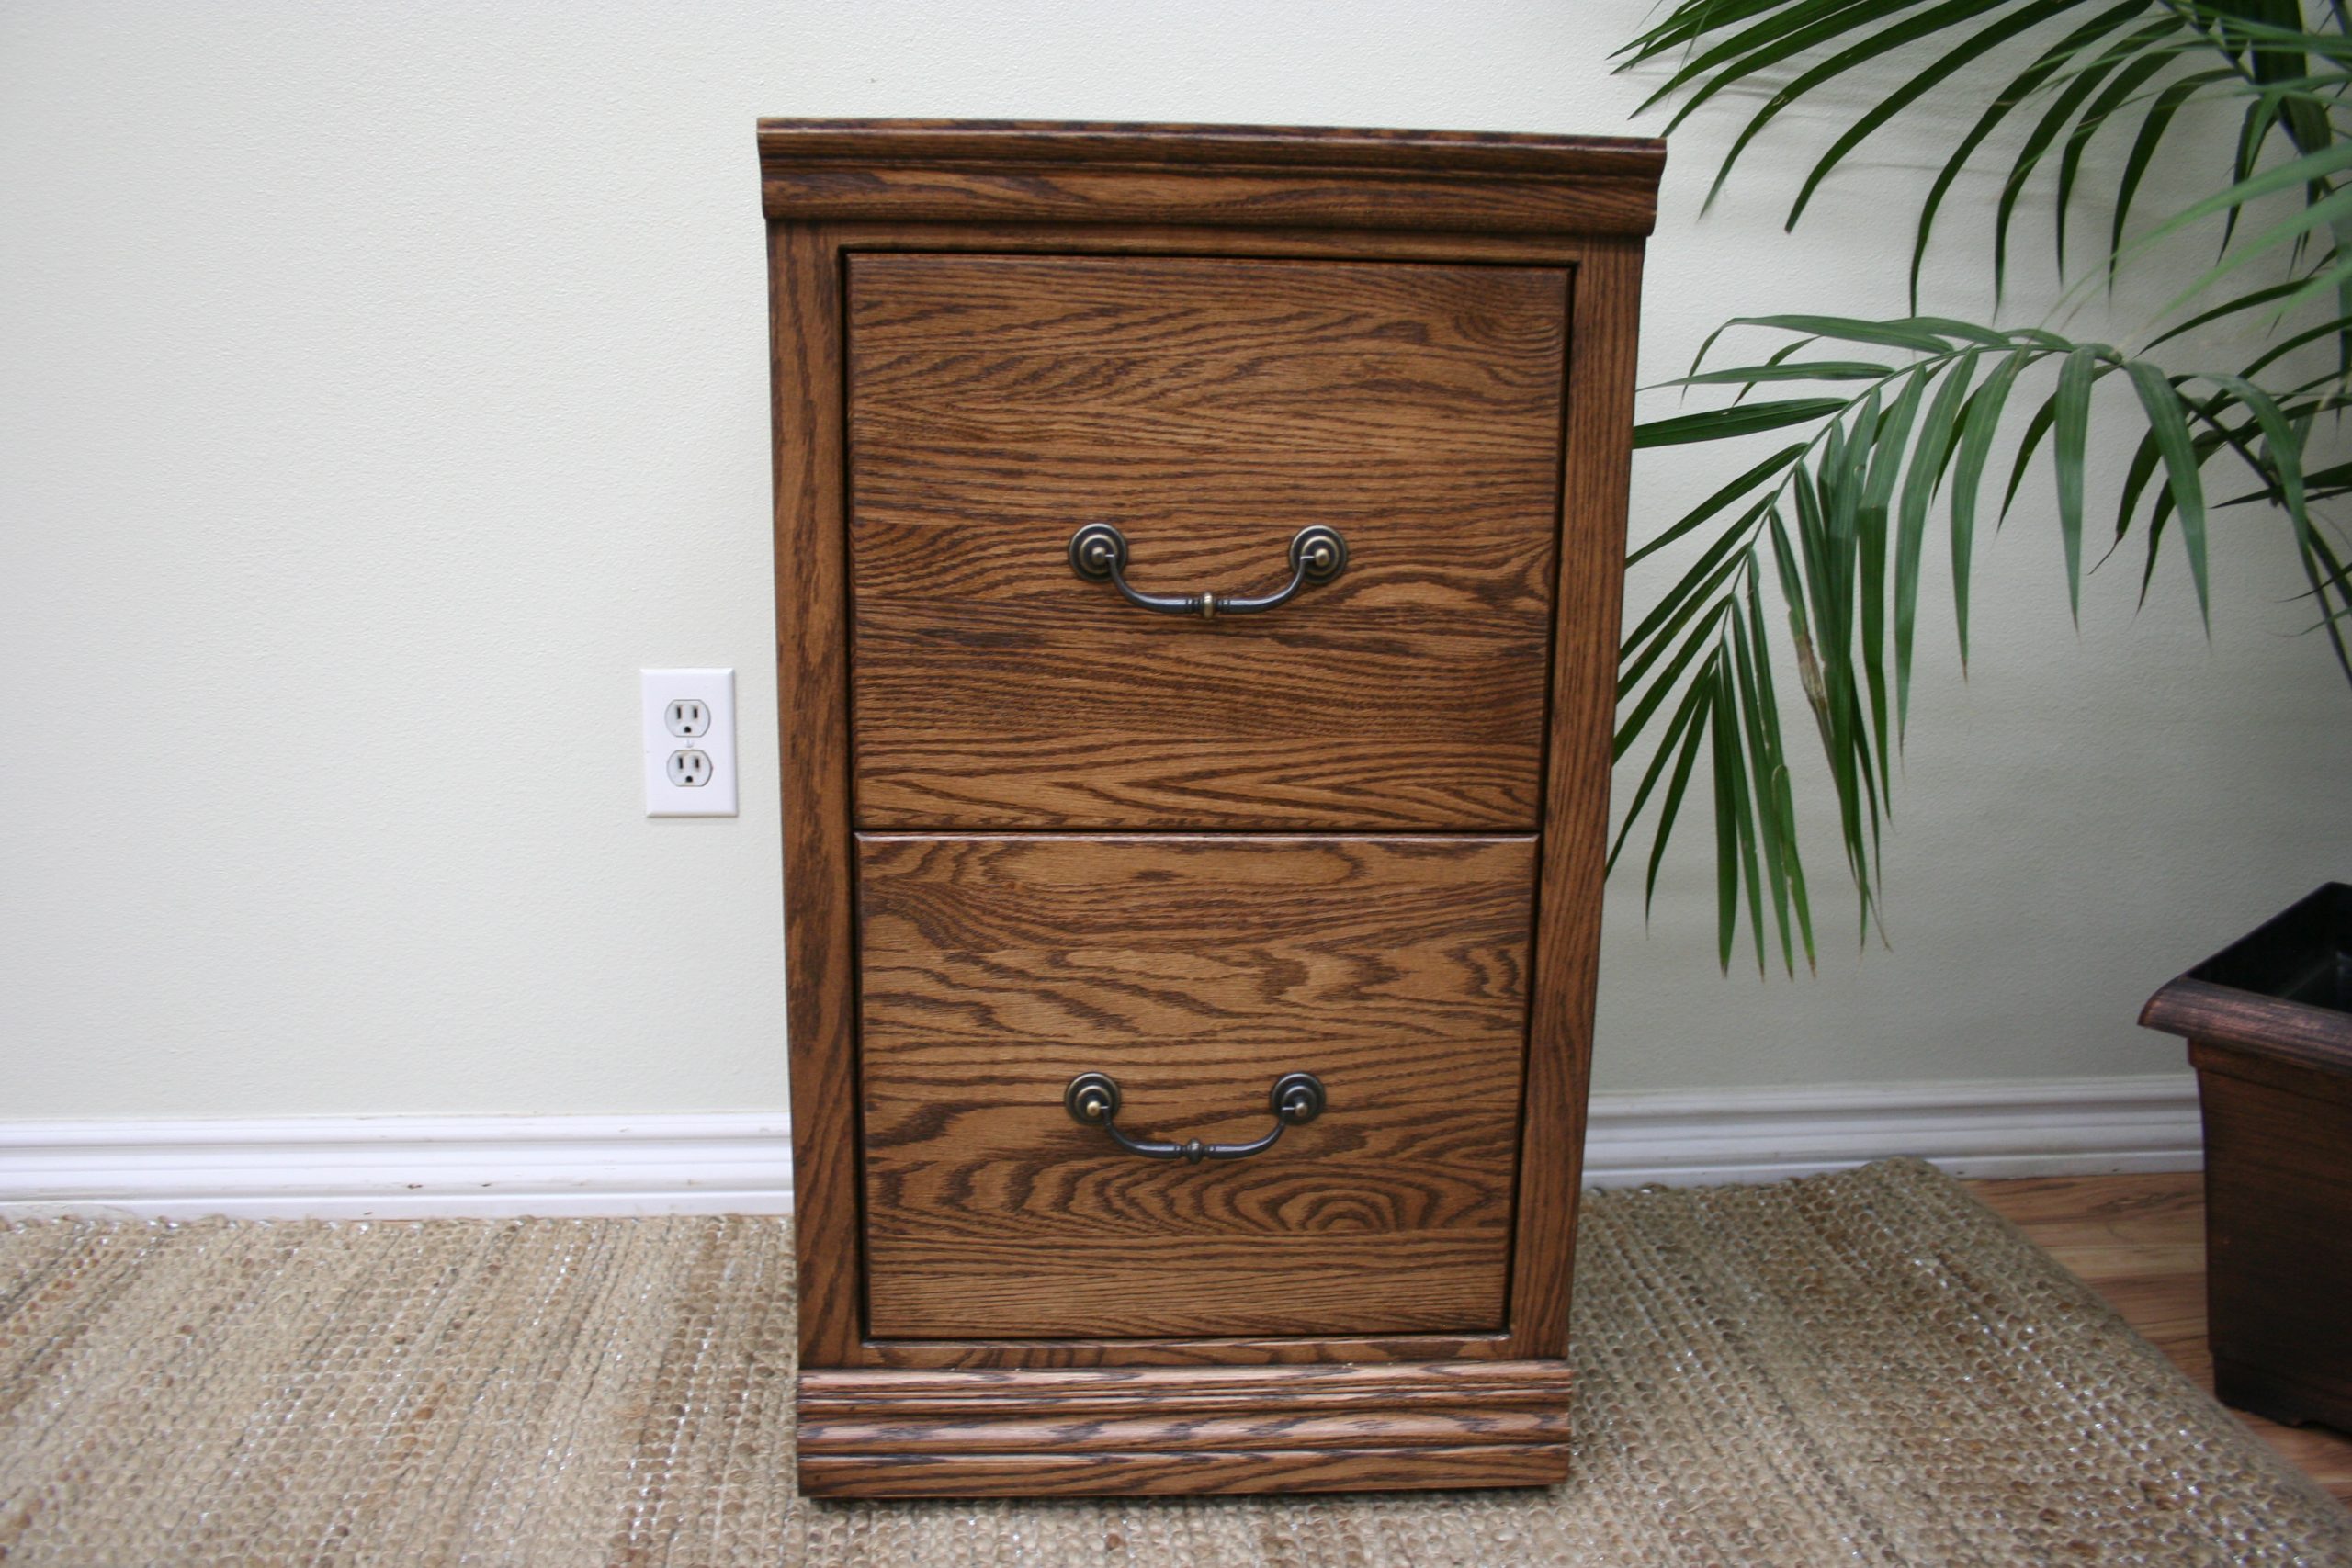 Traditional T178 2-Drawer File Cabinet shown in Oak